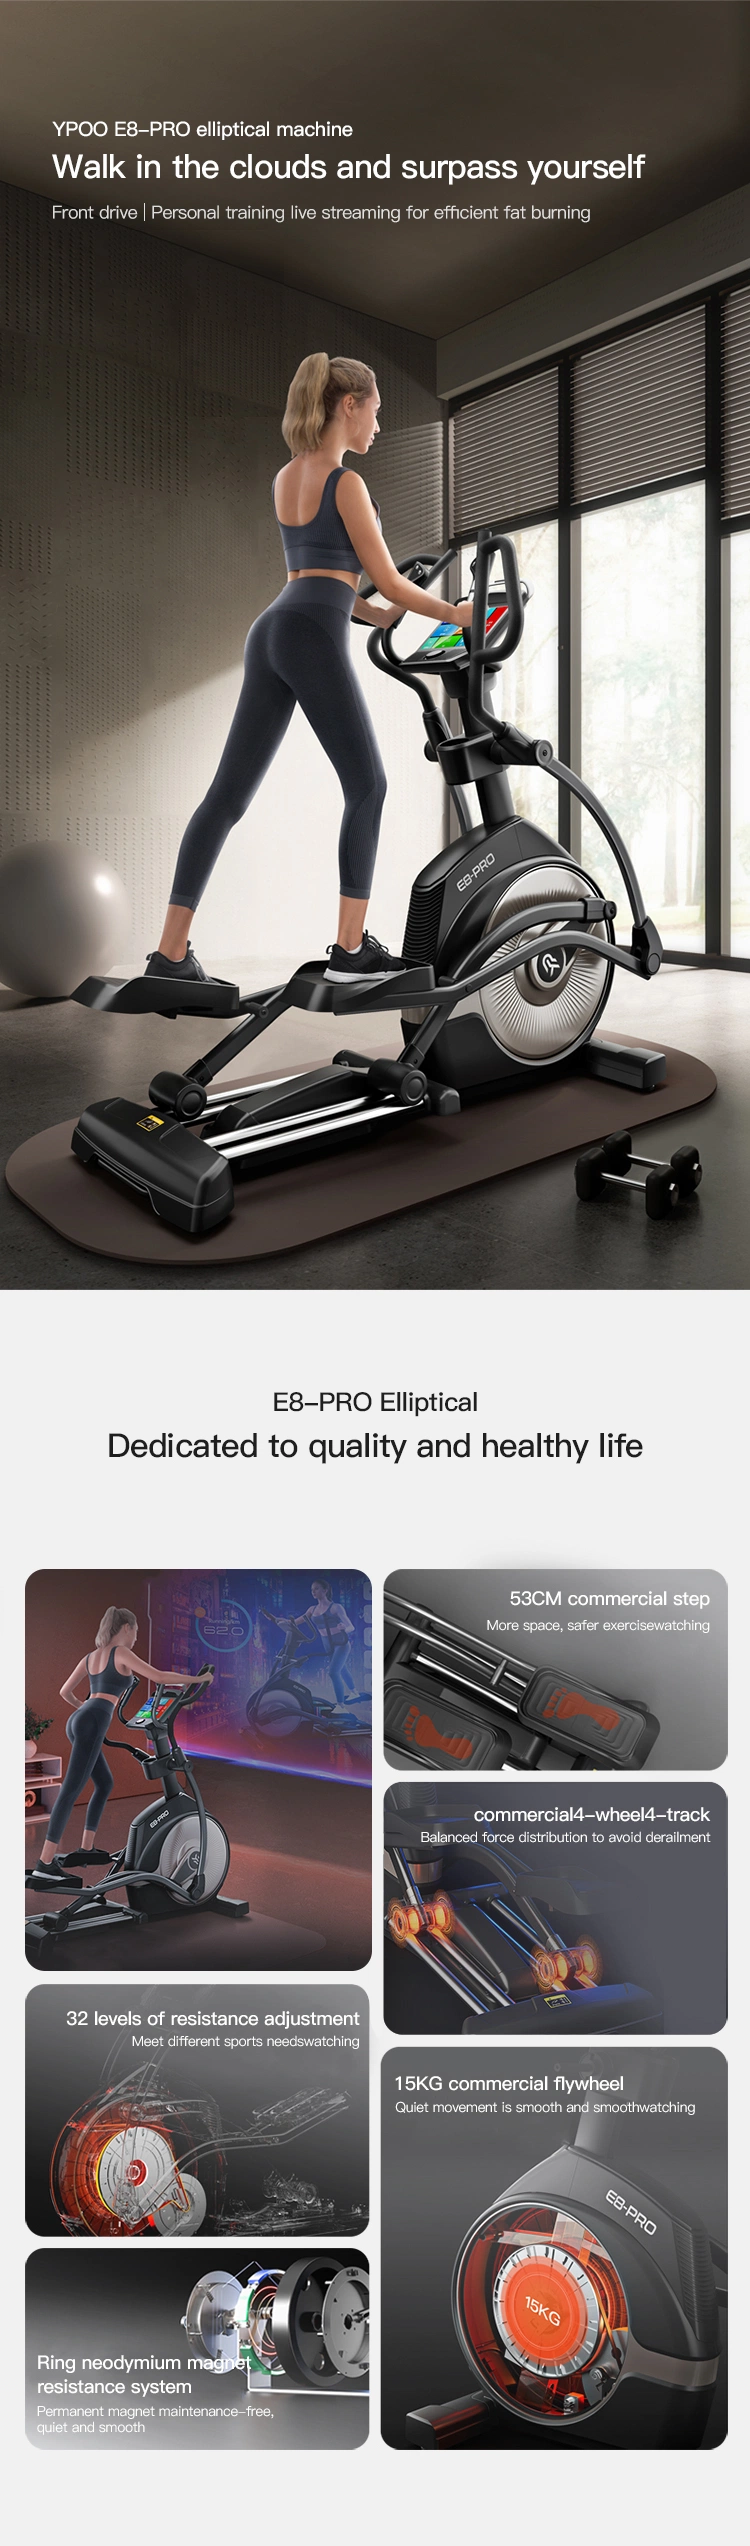 Ypoo New Cardio Fitness Equipment Cross Trainer Elliptical E8 Best Exercise Gym Magnetic Ellipticals with Yifit APP